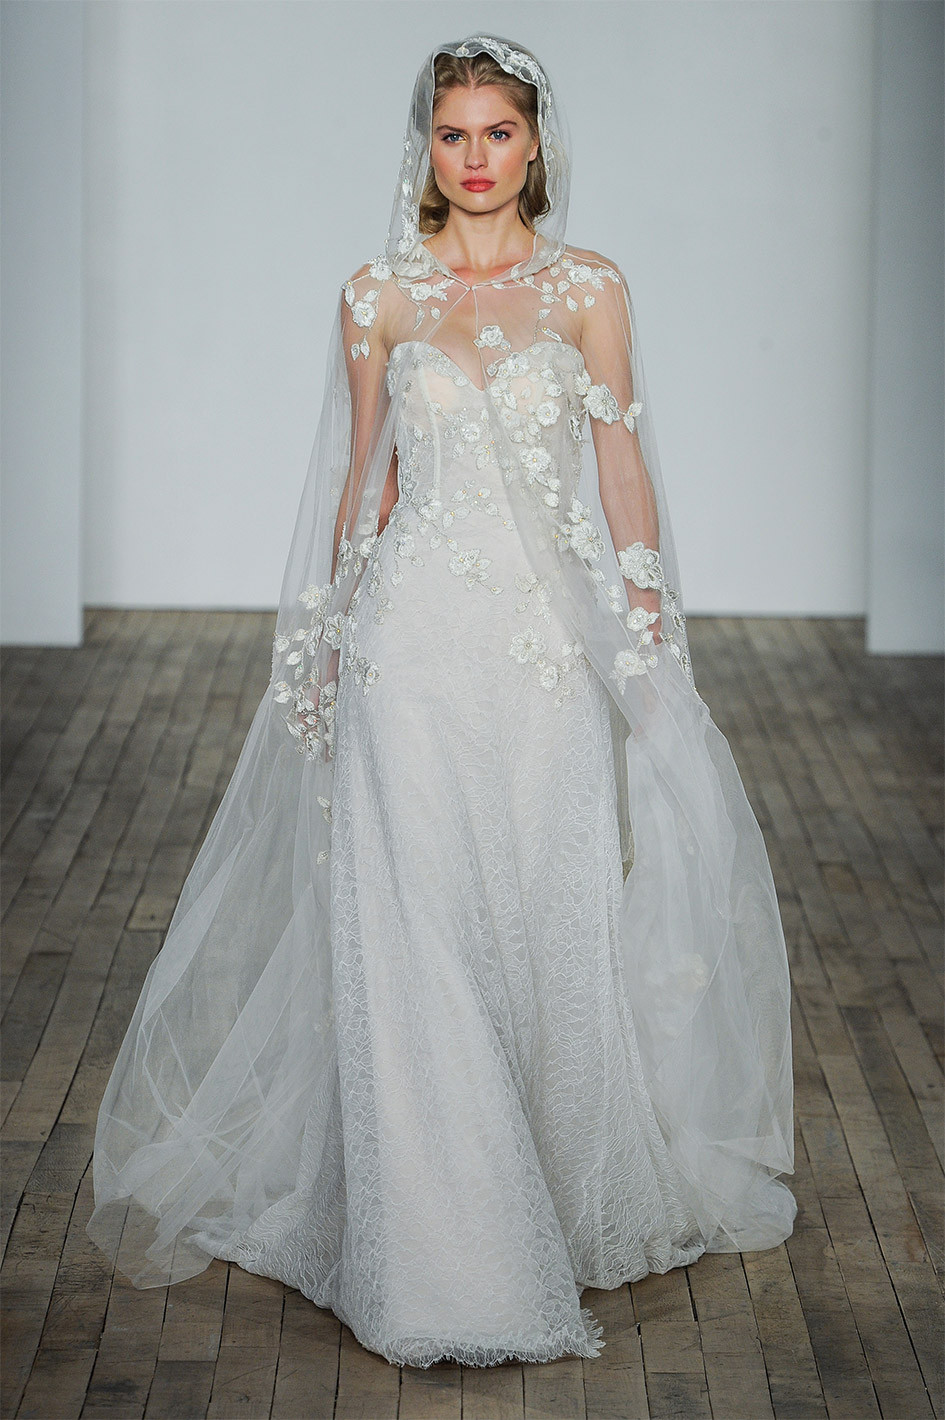 Most Beautiful Wedding Gowns
 Details Details The Best And Most Beautiful Wedding Gown